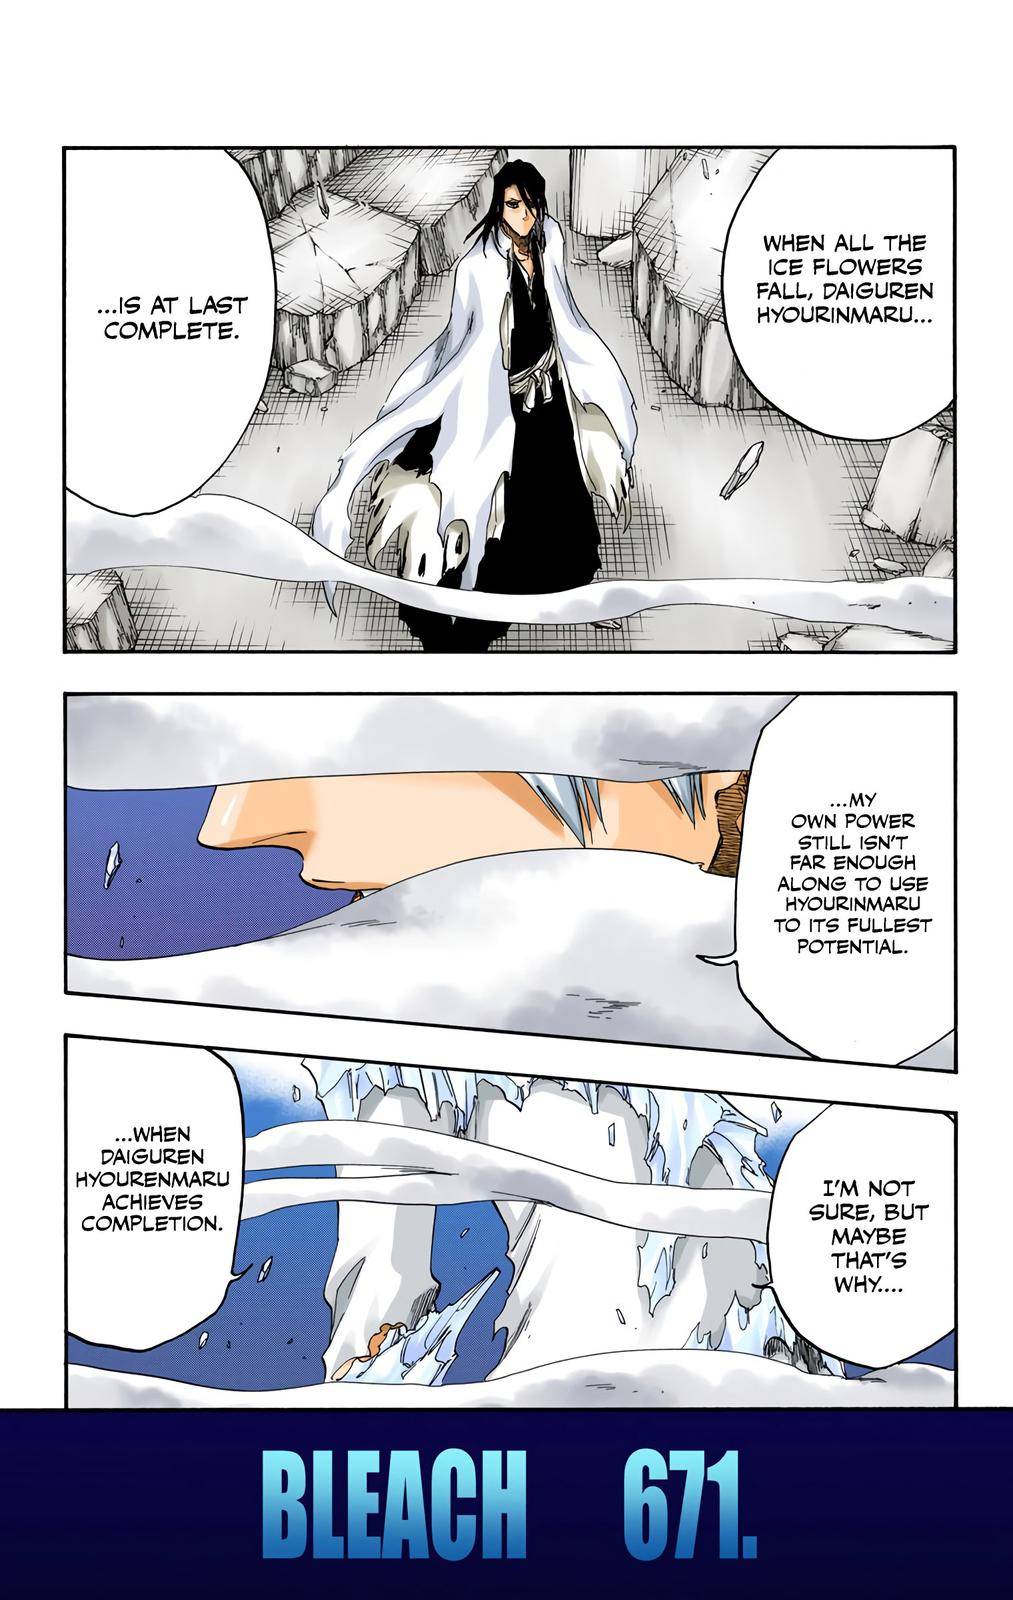 Bleach - Color - chapter 671 - #1